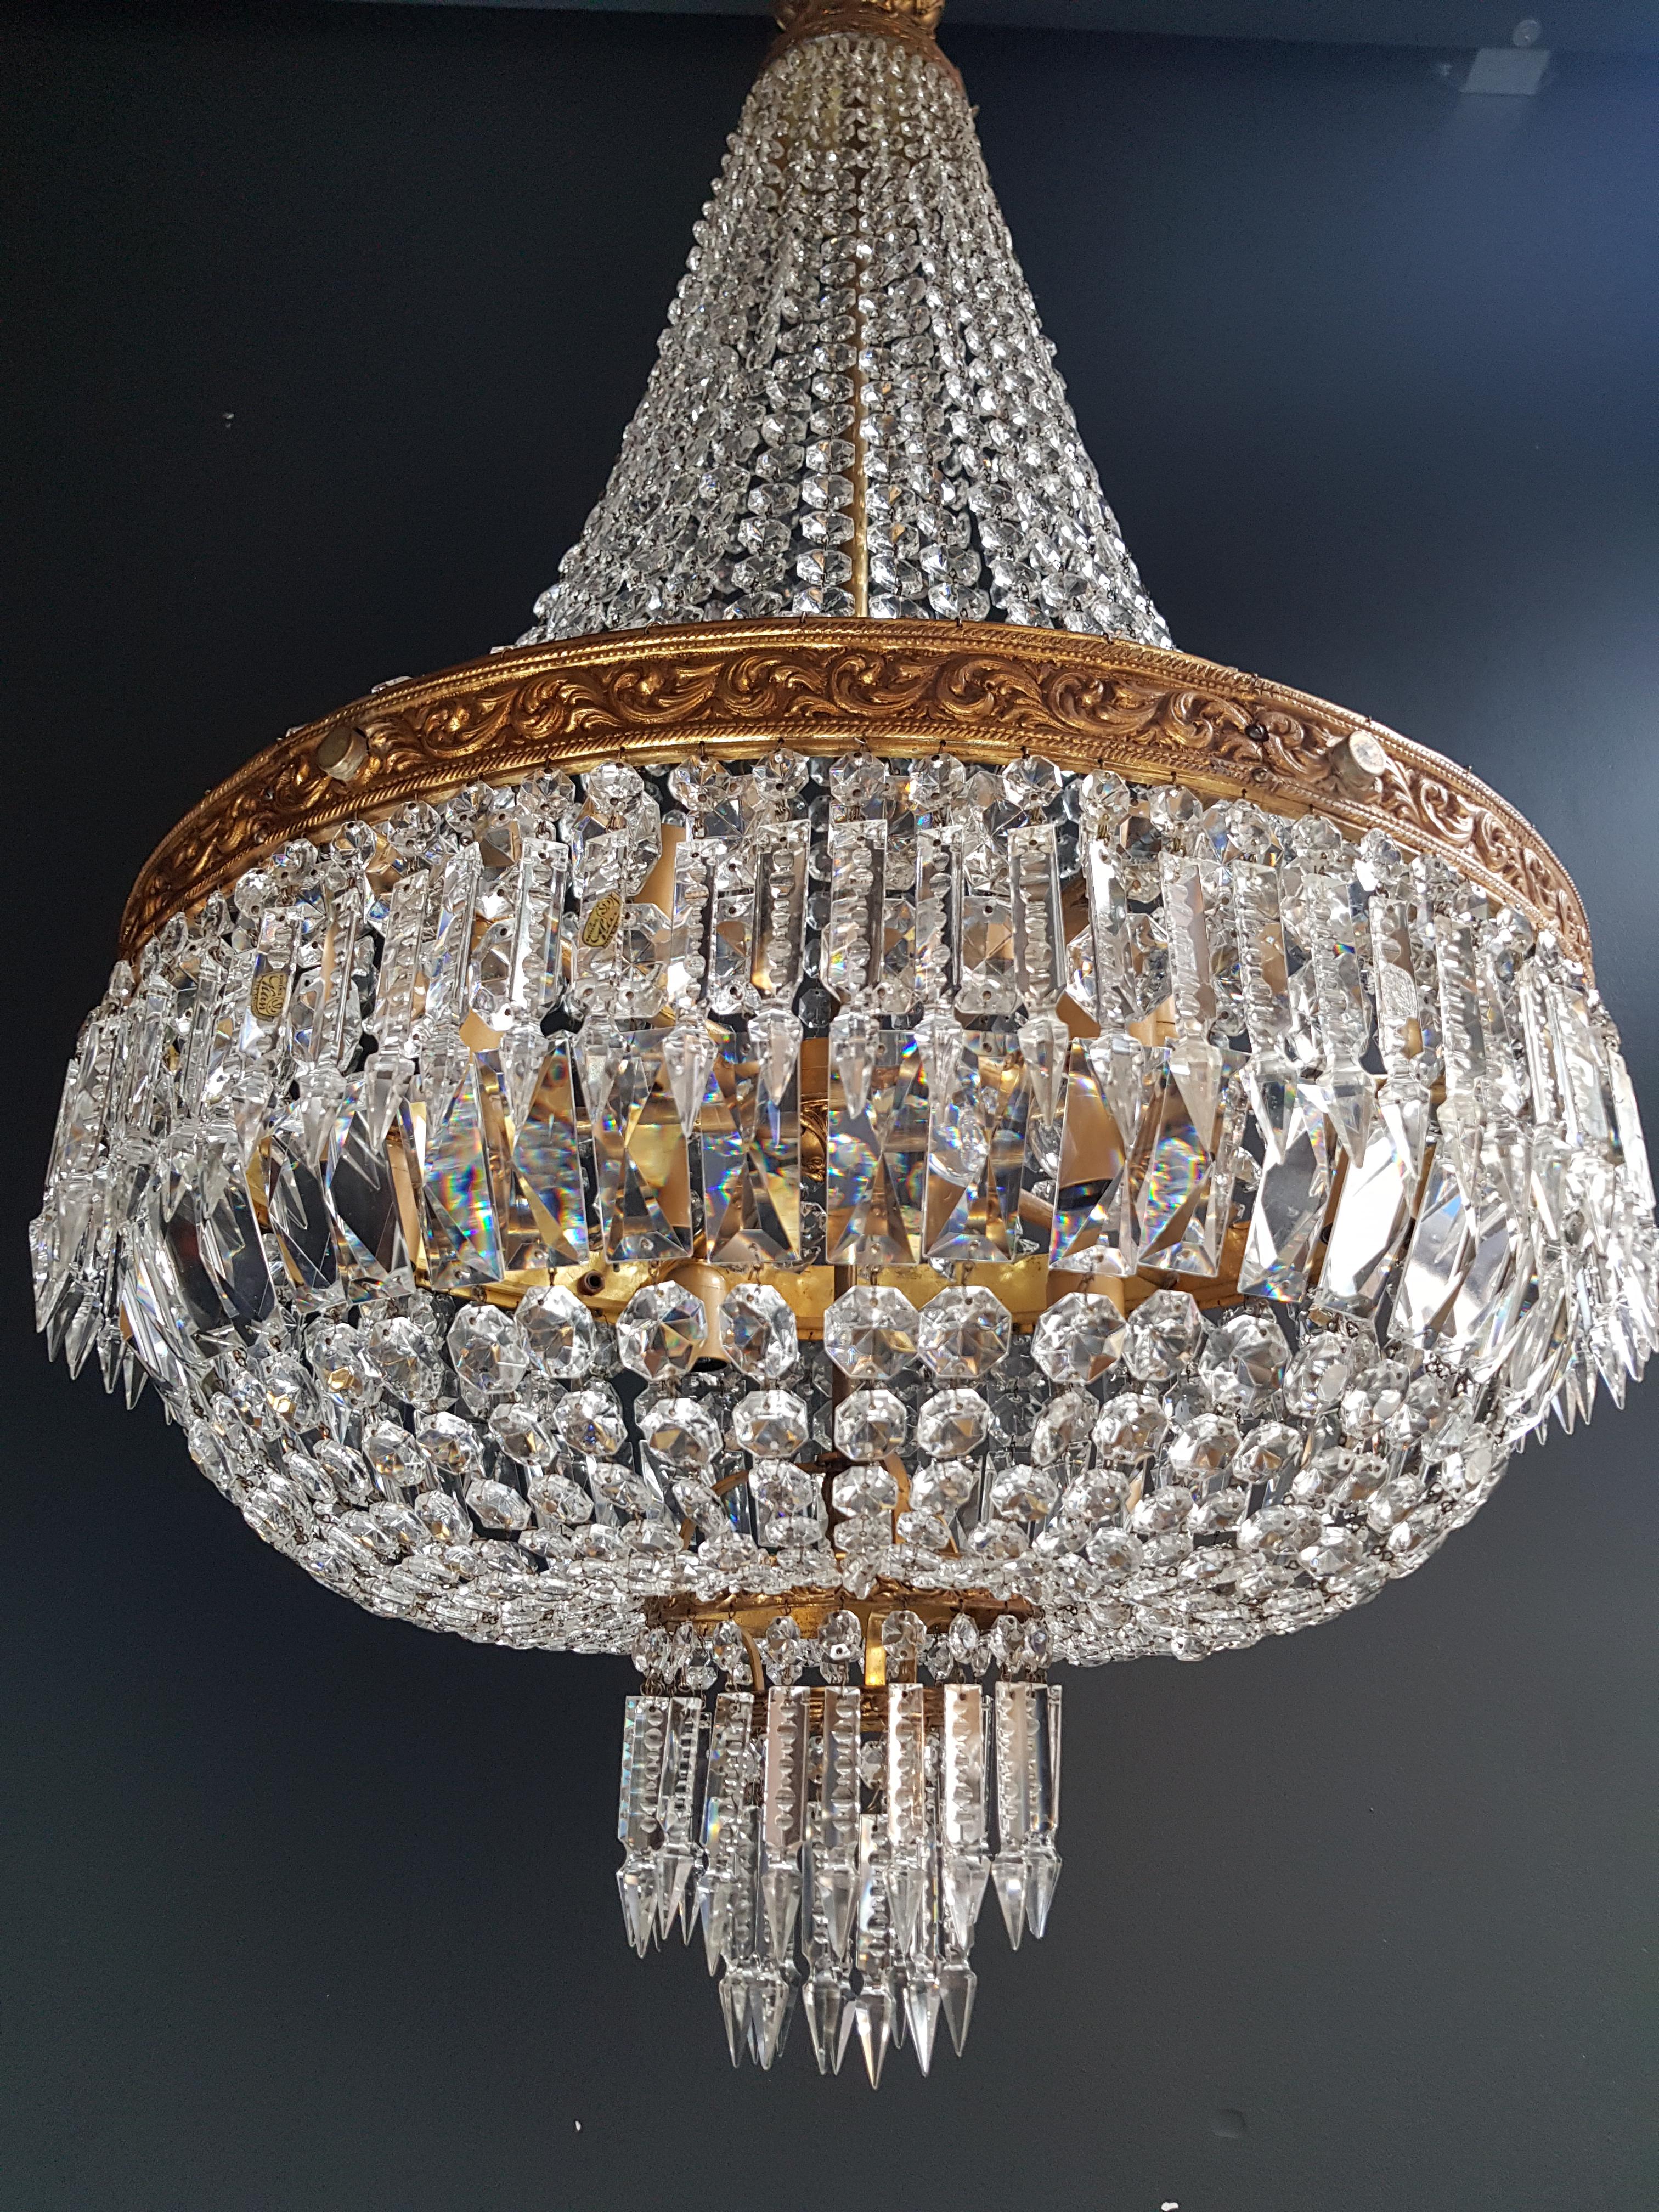 Cabling and sockets completely renewed. Crystal hand knotted
Measures: Total height 140 cm, height without chain: 110 cm, diameter 60 cm, weight (approximately) 15 kg.

Number of lights: 9-light bulb sockets: E27

  

Montgolfiè Empire brass